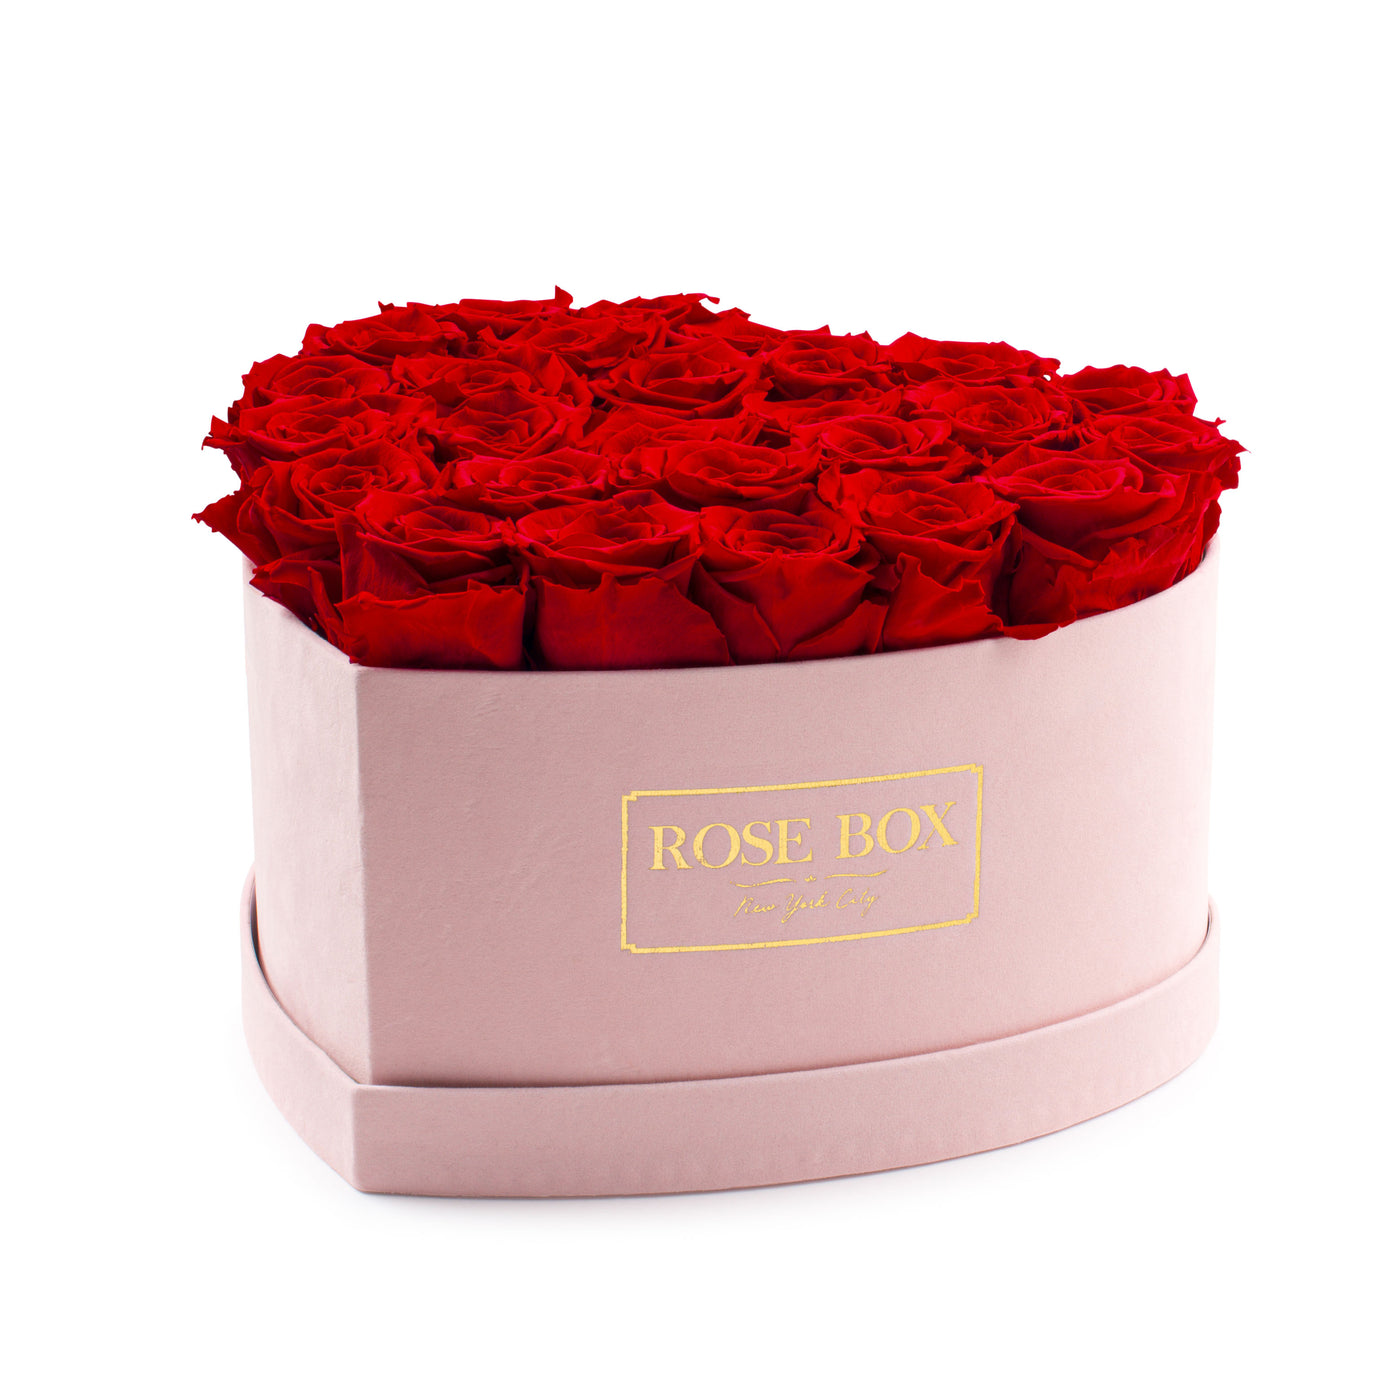 Large Pink Heart Box with Red Flame Roses